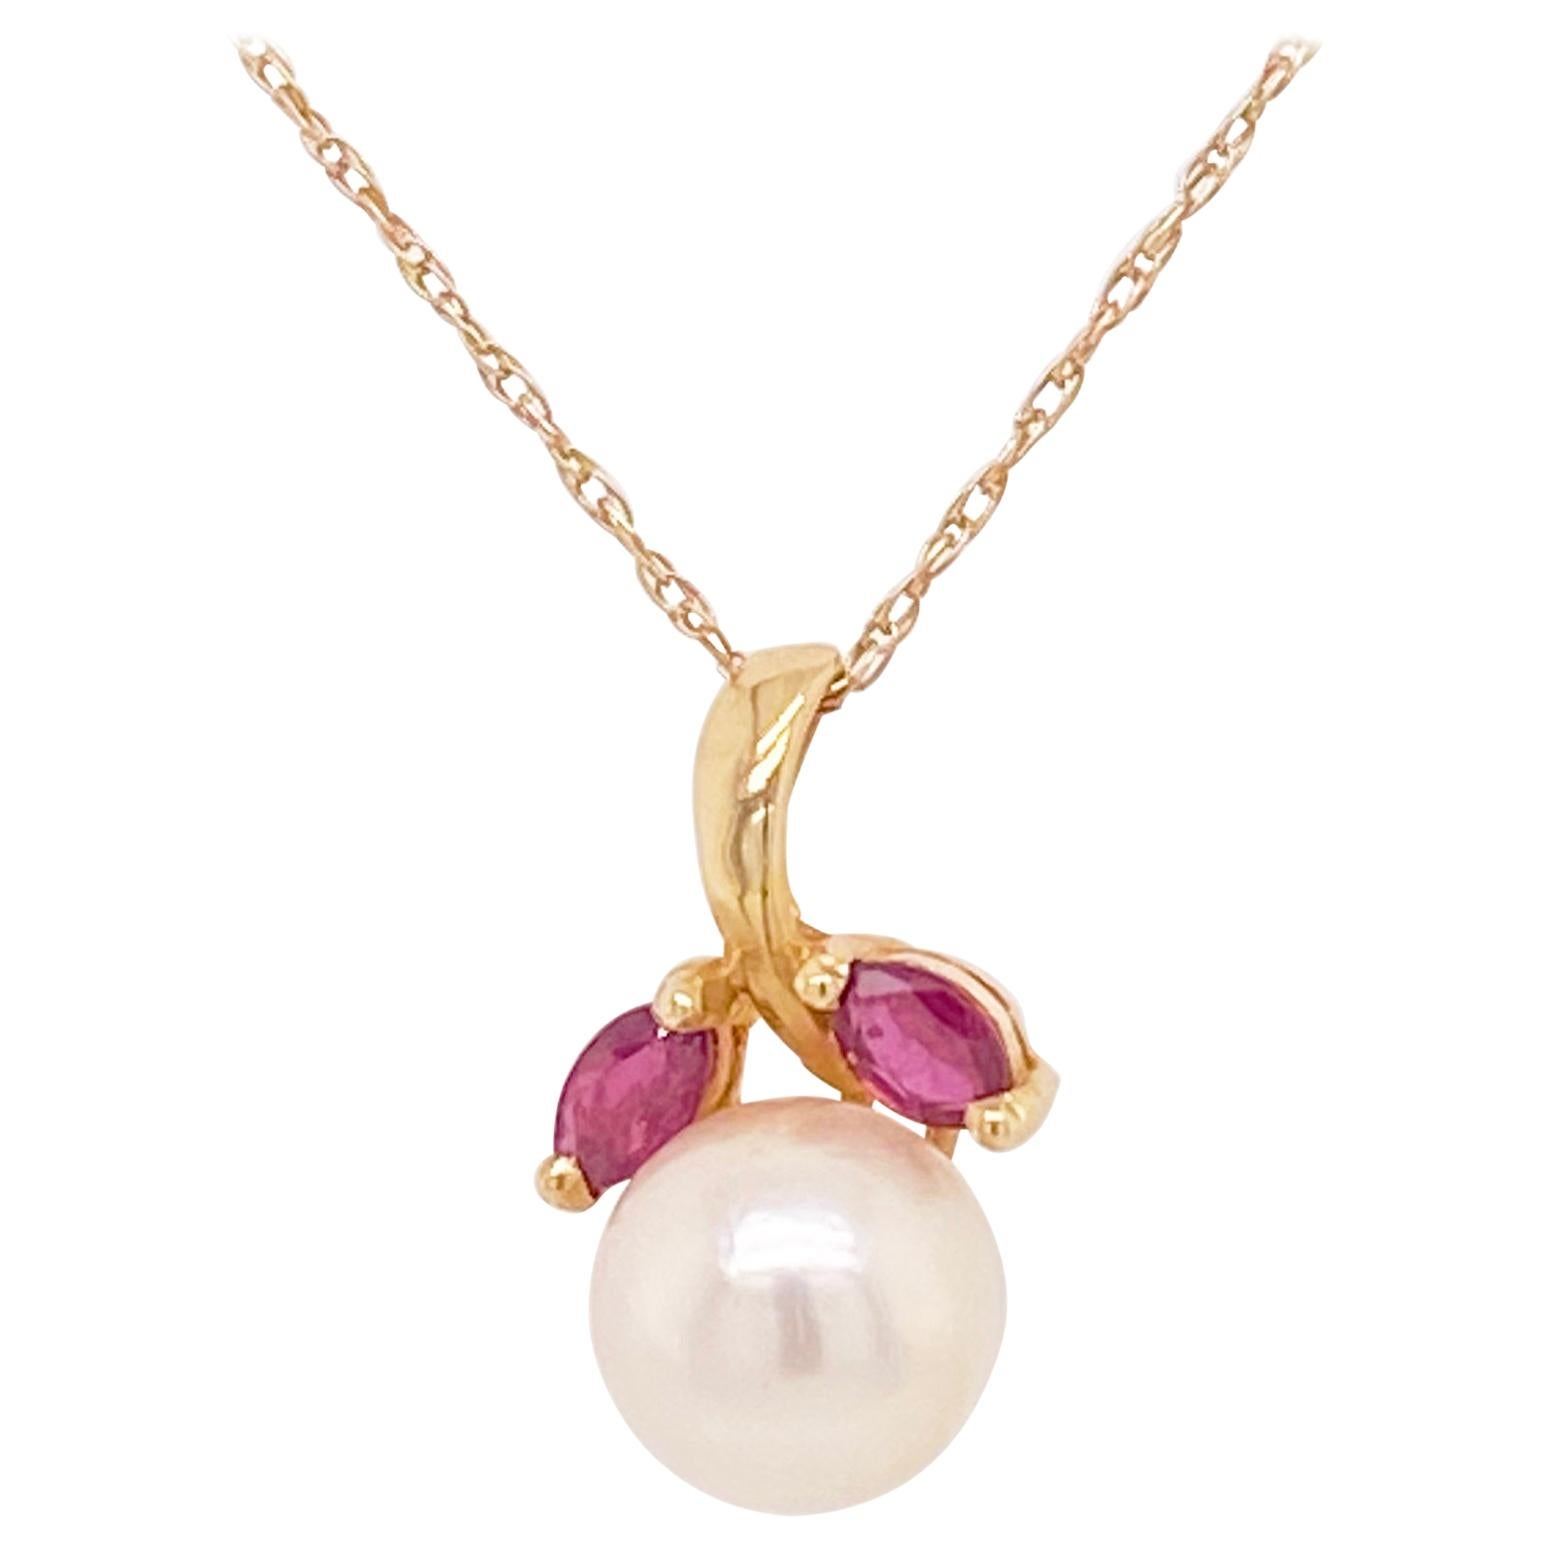 Pearl Ruby Pendant, 14 Karat Yellow Gold, Pearl Necklace, Leaf, Nature Inspired